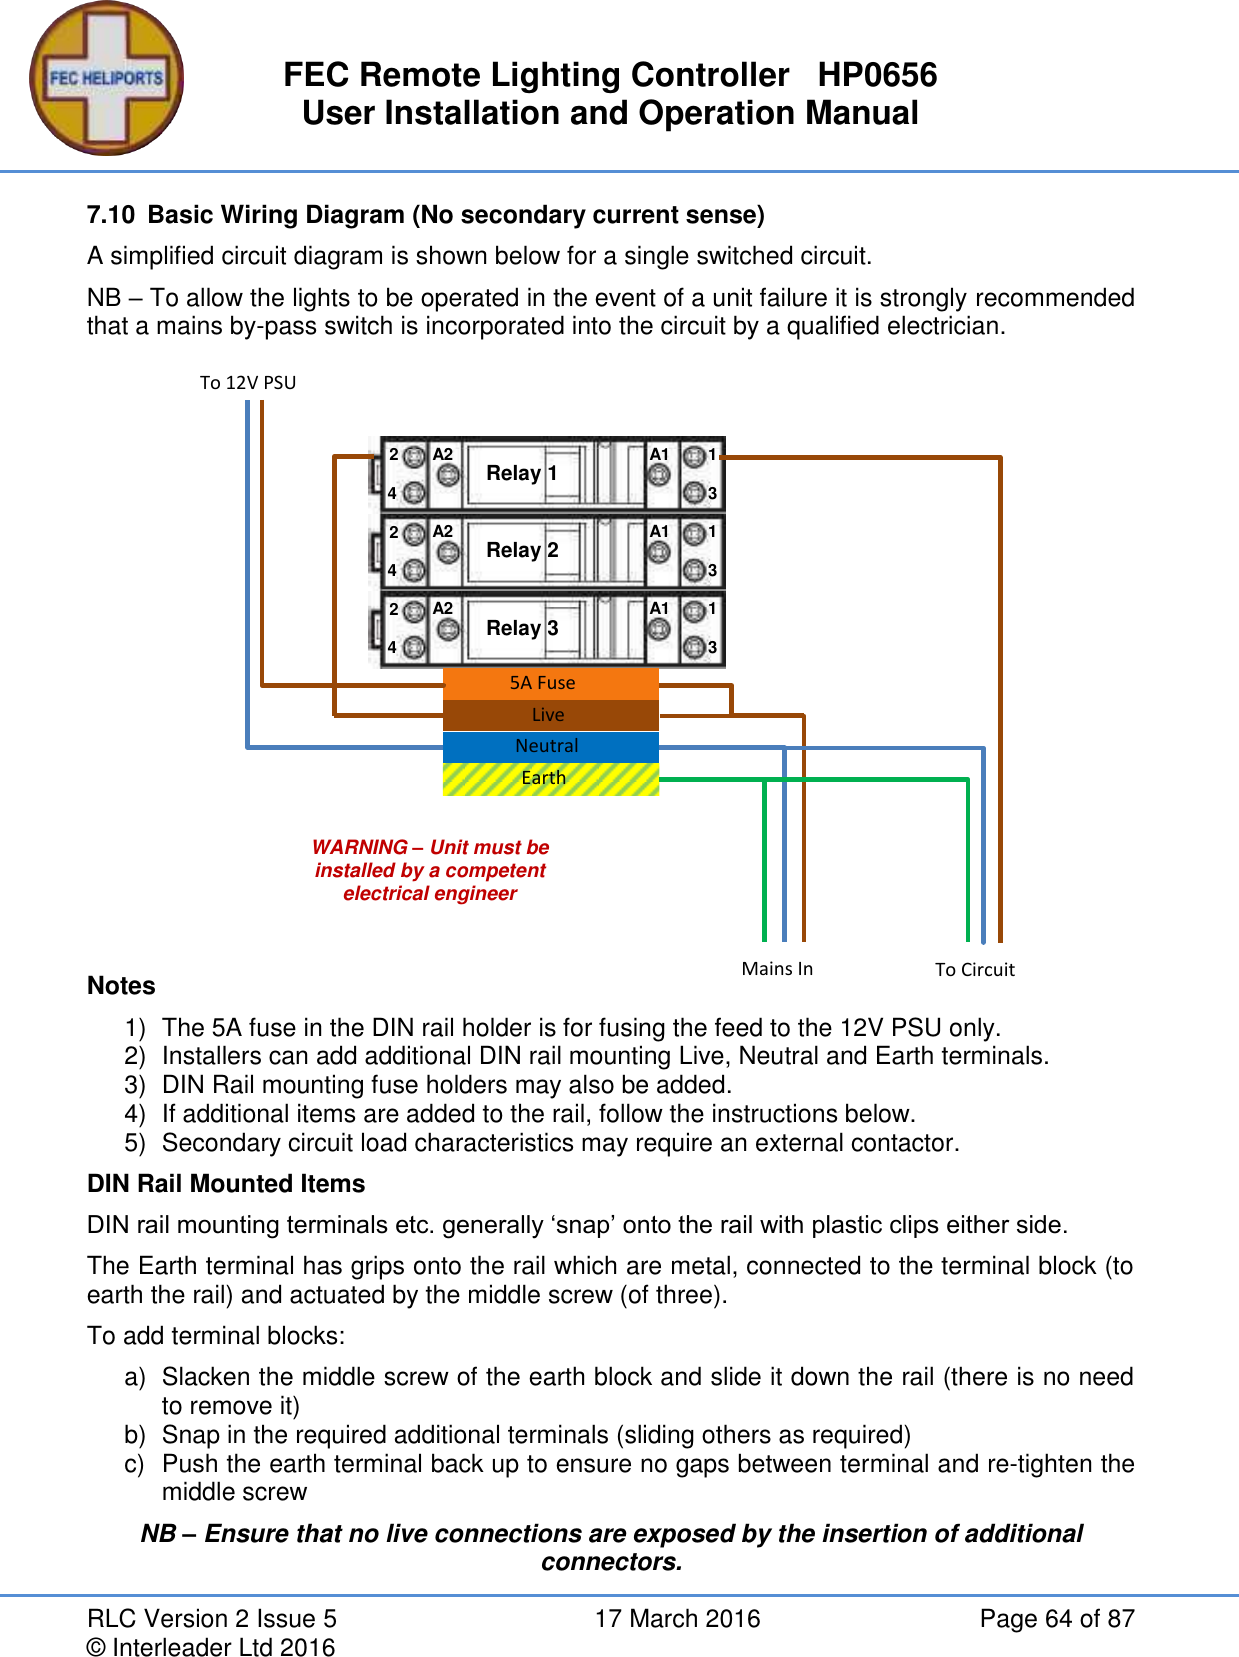 FEC Remote Lighting Controller   HP0656 User Installation and Operation Manual RLC Version 2 Issue 5  17 March 2016  Page 64 of 87 © Interleader Ltd 2016 7.10  Basic Wiring Diagram (No secondary current sense) A simplified circuit diagram is shown below for a single switched circuit. NB – To allow the lights to be operated in the event of a unit failure it is strongly recommended that a mains by-pass switch is incorporated into the circuit by a qualified electrician.                Notes 1)  The 5A fuse in the DIN rail holder is for fusing the feed to the 12V PSU only. 2)  Installers can add additional DIN rail mounting Live, Neutral and Earth terminals. 3)  DIN Rail mounting fuse holders may also be added. 4)  If additional items are added to the rail, follow the instructions below. 5)  Secondary circuit load characteristics may require an external contactor. DIN Rail Mounted Items DIN rail mounting terminals etc. generally ‘snap’ onto the rail with plastic clips either side. The Earth terminal has grips onto the rail which are metal, connected to the terminal block (to earth the rail) and actuated by the middle screw (of three). To add terminal blocks: a)  Slacken the middle screw of the earth block and slide it down the rail (there is no need to remove it) b)  Snap in the required additional terminals (sliding others as required) c)  Push the earth terminal back up to ensure no gaps between terminal and re-tighten the middle screw NB – Ensure that no live connections are exposed by the insertion of additional connectors. WARNING – Unit must be installed by a competent electrical engineer Relay 1 A2 A1 4 2 1 3 Relay 2 A2 A1 4 2 1 3 Relay 3 A2 A1 4 2 1 3     To 12V PSU Mains In To Circuit 5A Fuse Live Neutral Earth 